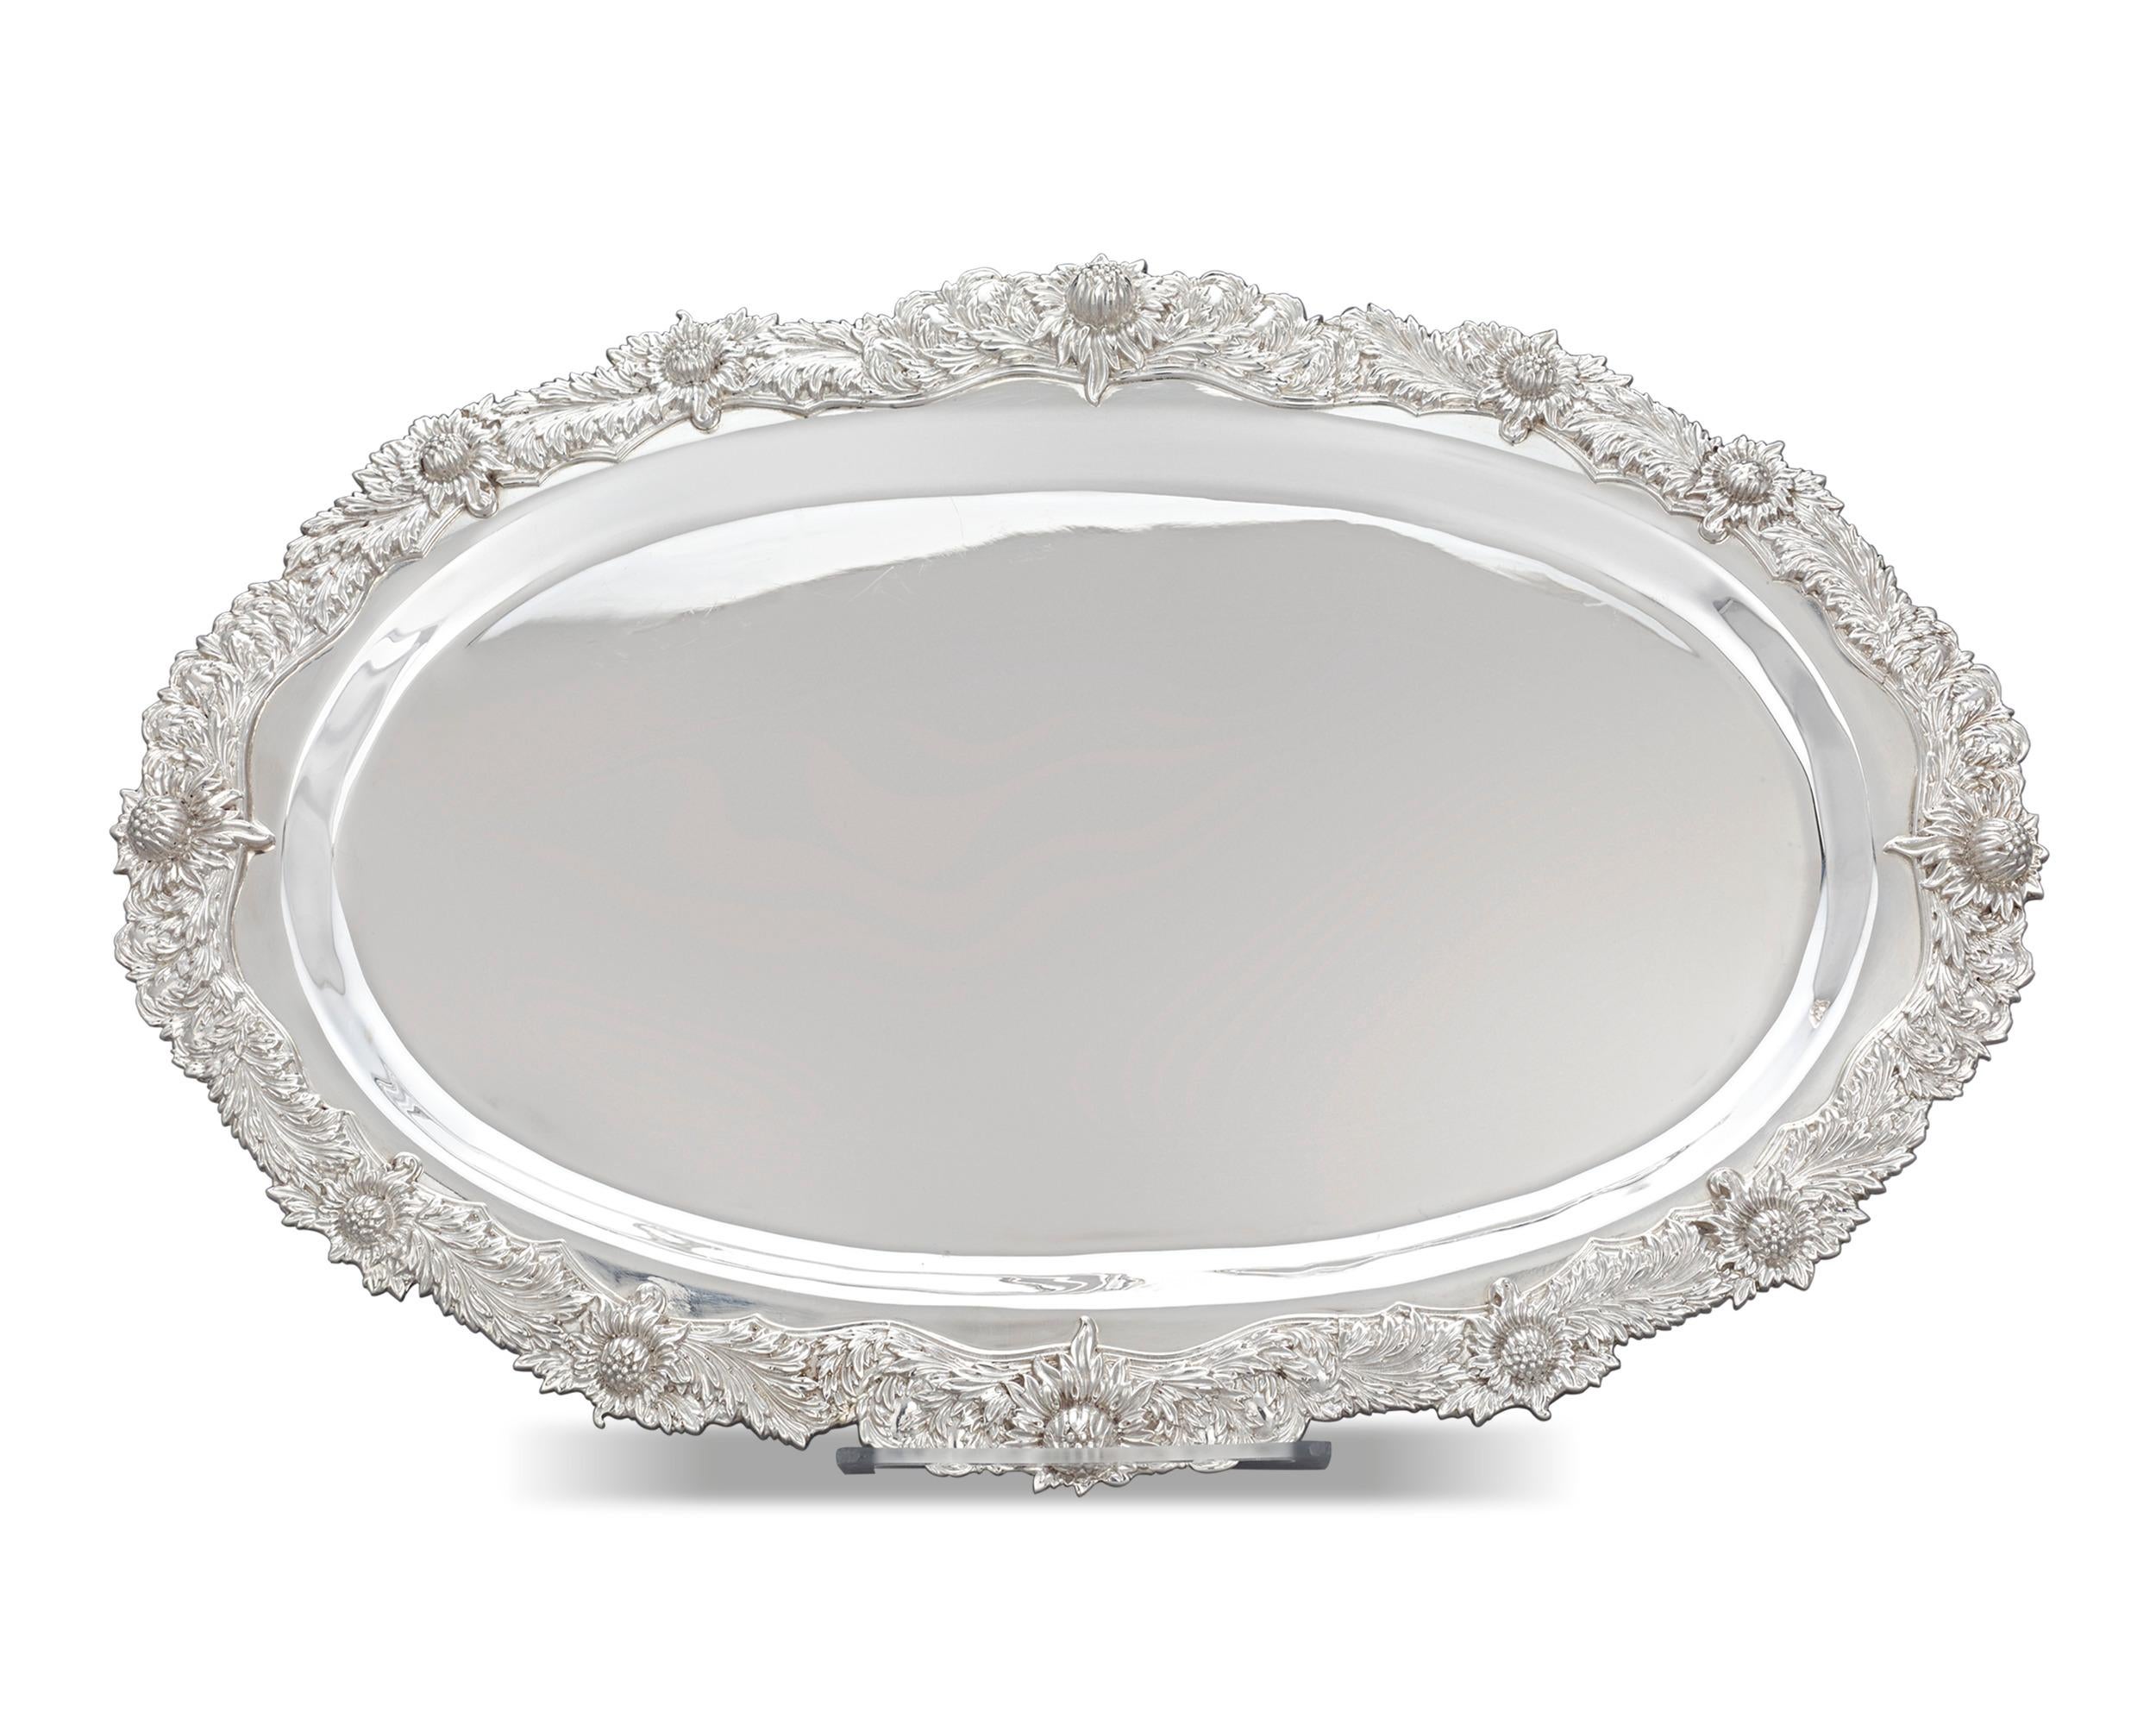 American Chrysanthemum Sterling Silver Serving Tray by Tiffany & Co.